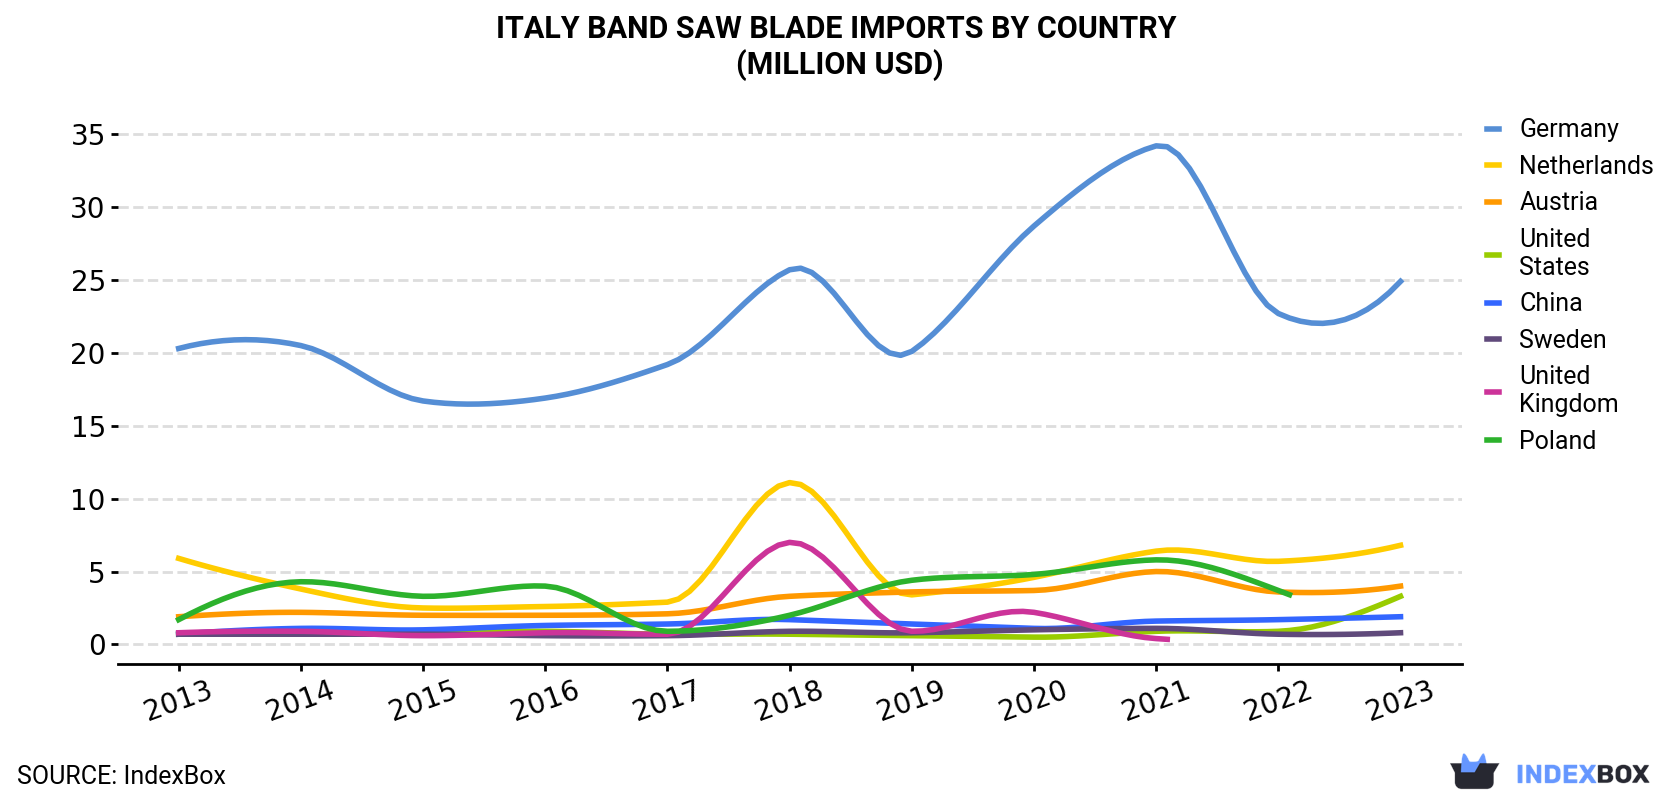 Italy Band Saw Blade Imports By Country (Million USD)